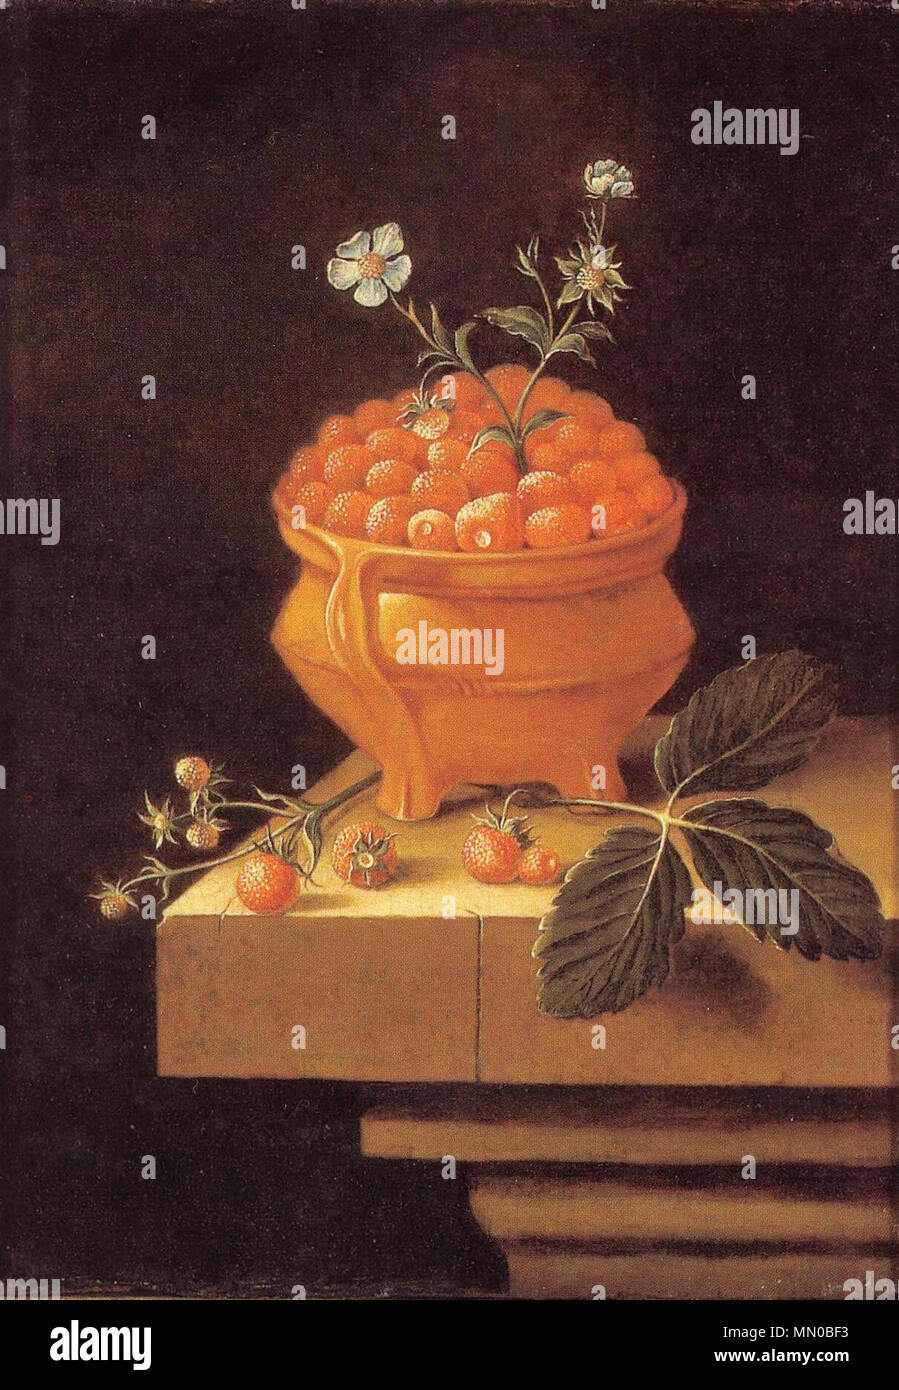 .    This object is indexed in RKDimages, database of the Netherlands Institute for Art History, under the reference 121714. čeština | English | français | македонски | Nederlands | +/−    English: Still life with a pot of strawberries on a stone table . after 1700.   After Adriaen Coorte  (fl. 1683–1707)    Alternative names S. Adriaan Coorte, Adriaen Corte, Adrian Coorte  Description Dutch painter  Date of birth/death circa 1665 after 1707  Location of birth/death Middelburg Middelburg (?)  Work period from 1683 until 1707  Work location Middelburg  Authority control  : Q367798 VIAF:?3559870 Stock Photo